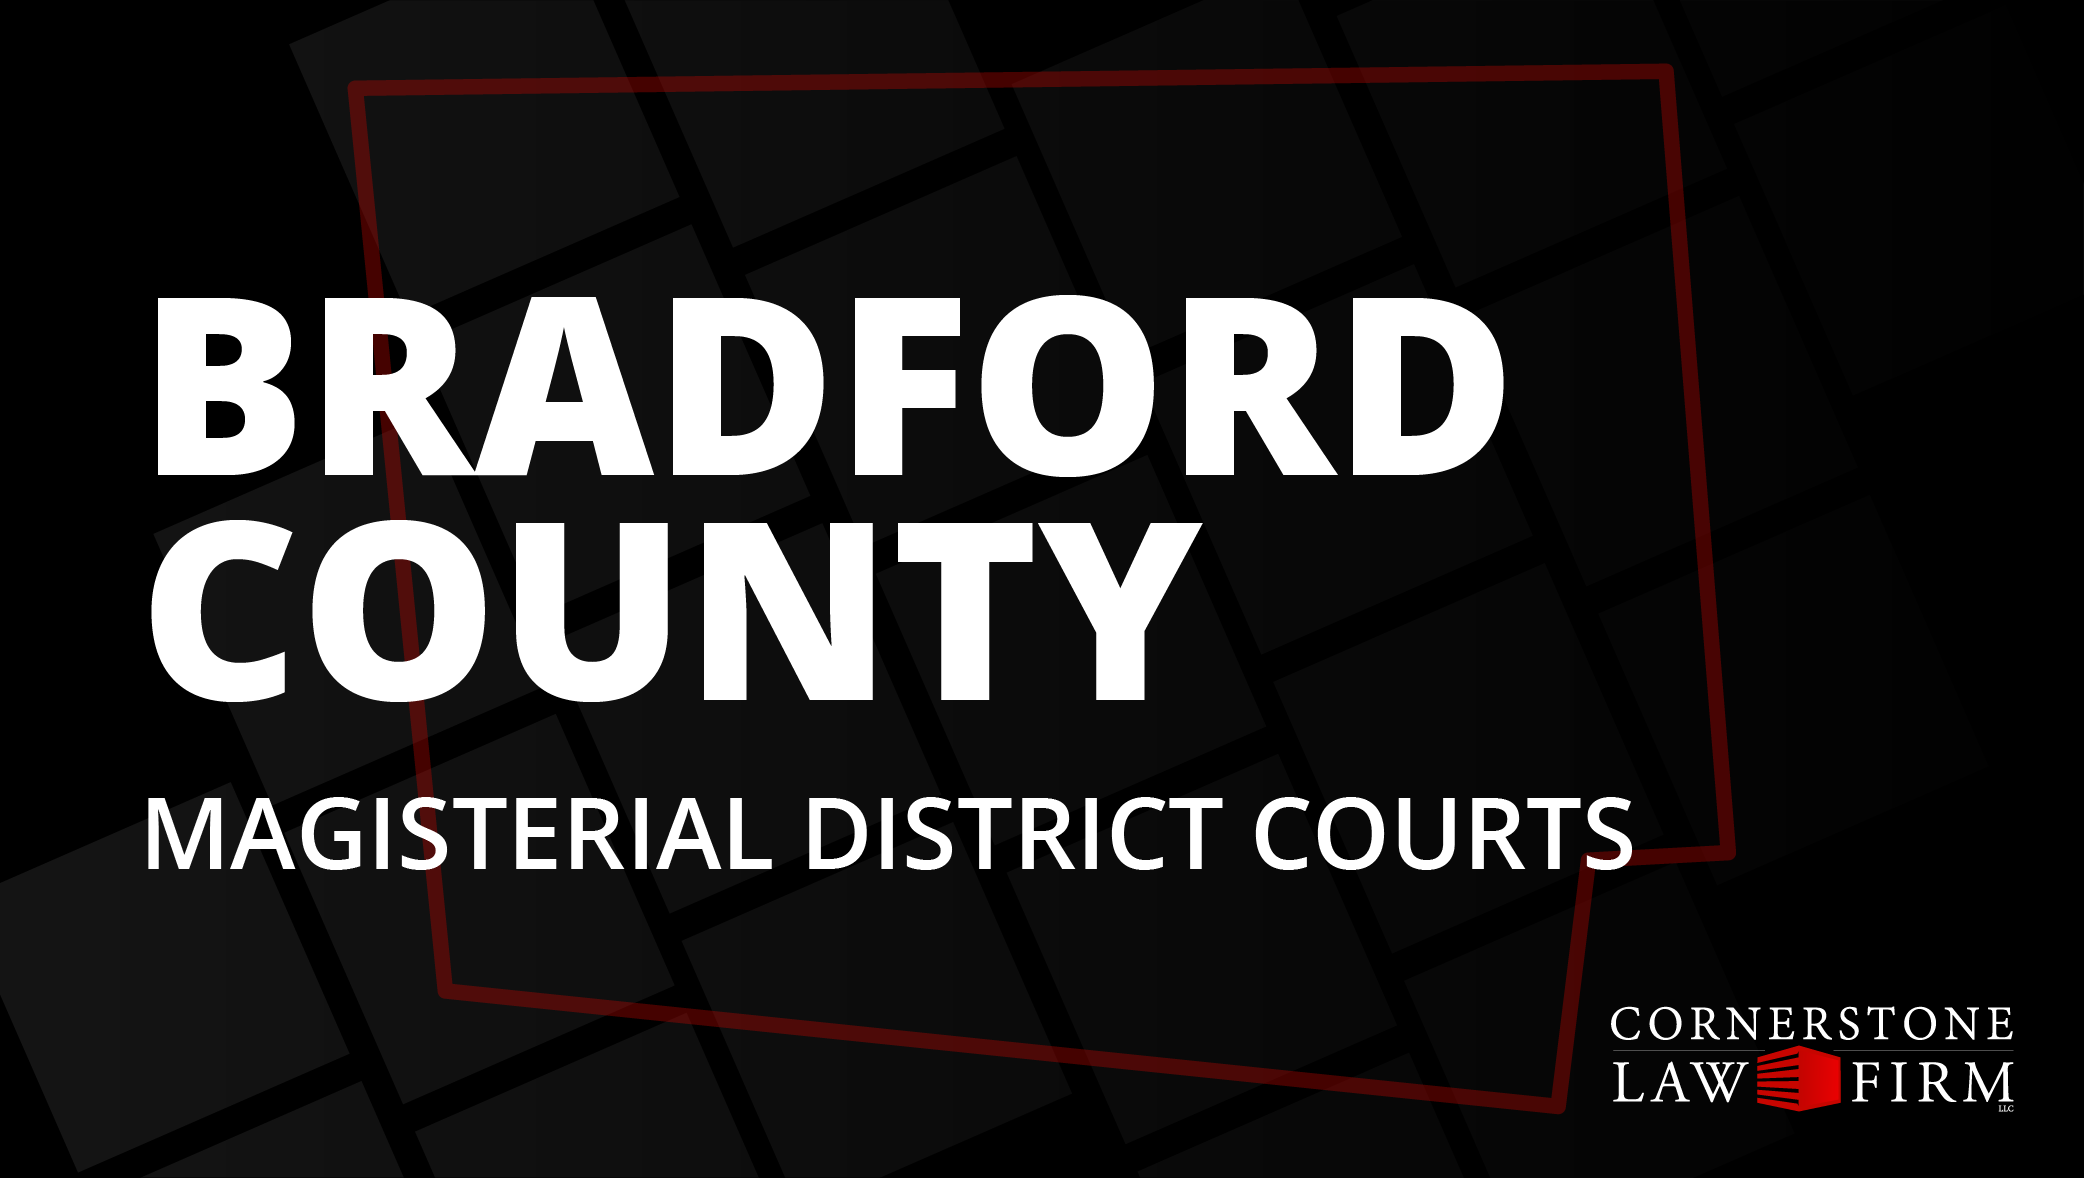 The words "Bradford County Magisterial District Courts" over a black background with a faded red outline of the county.